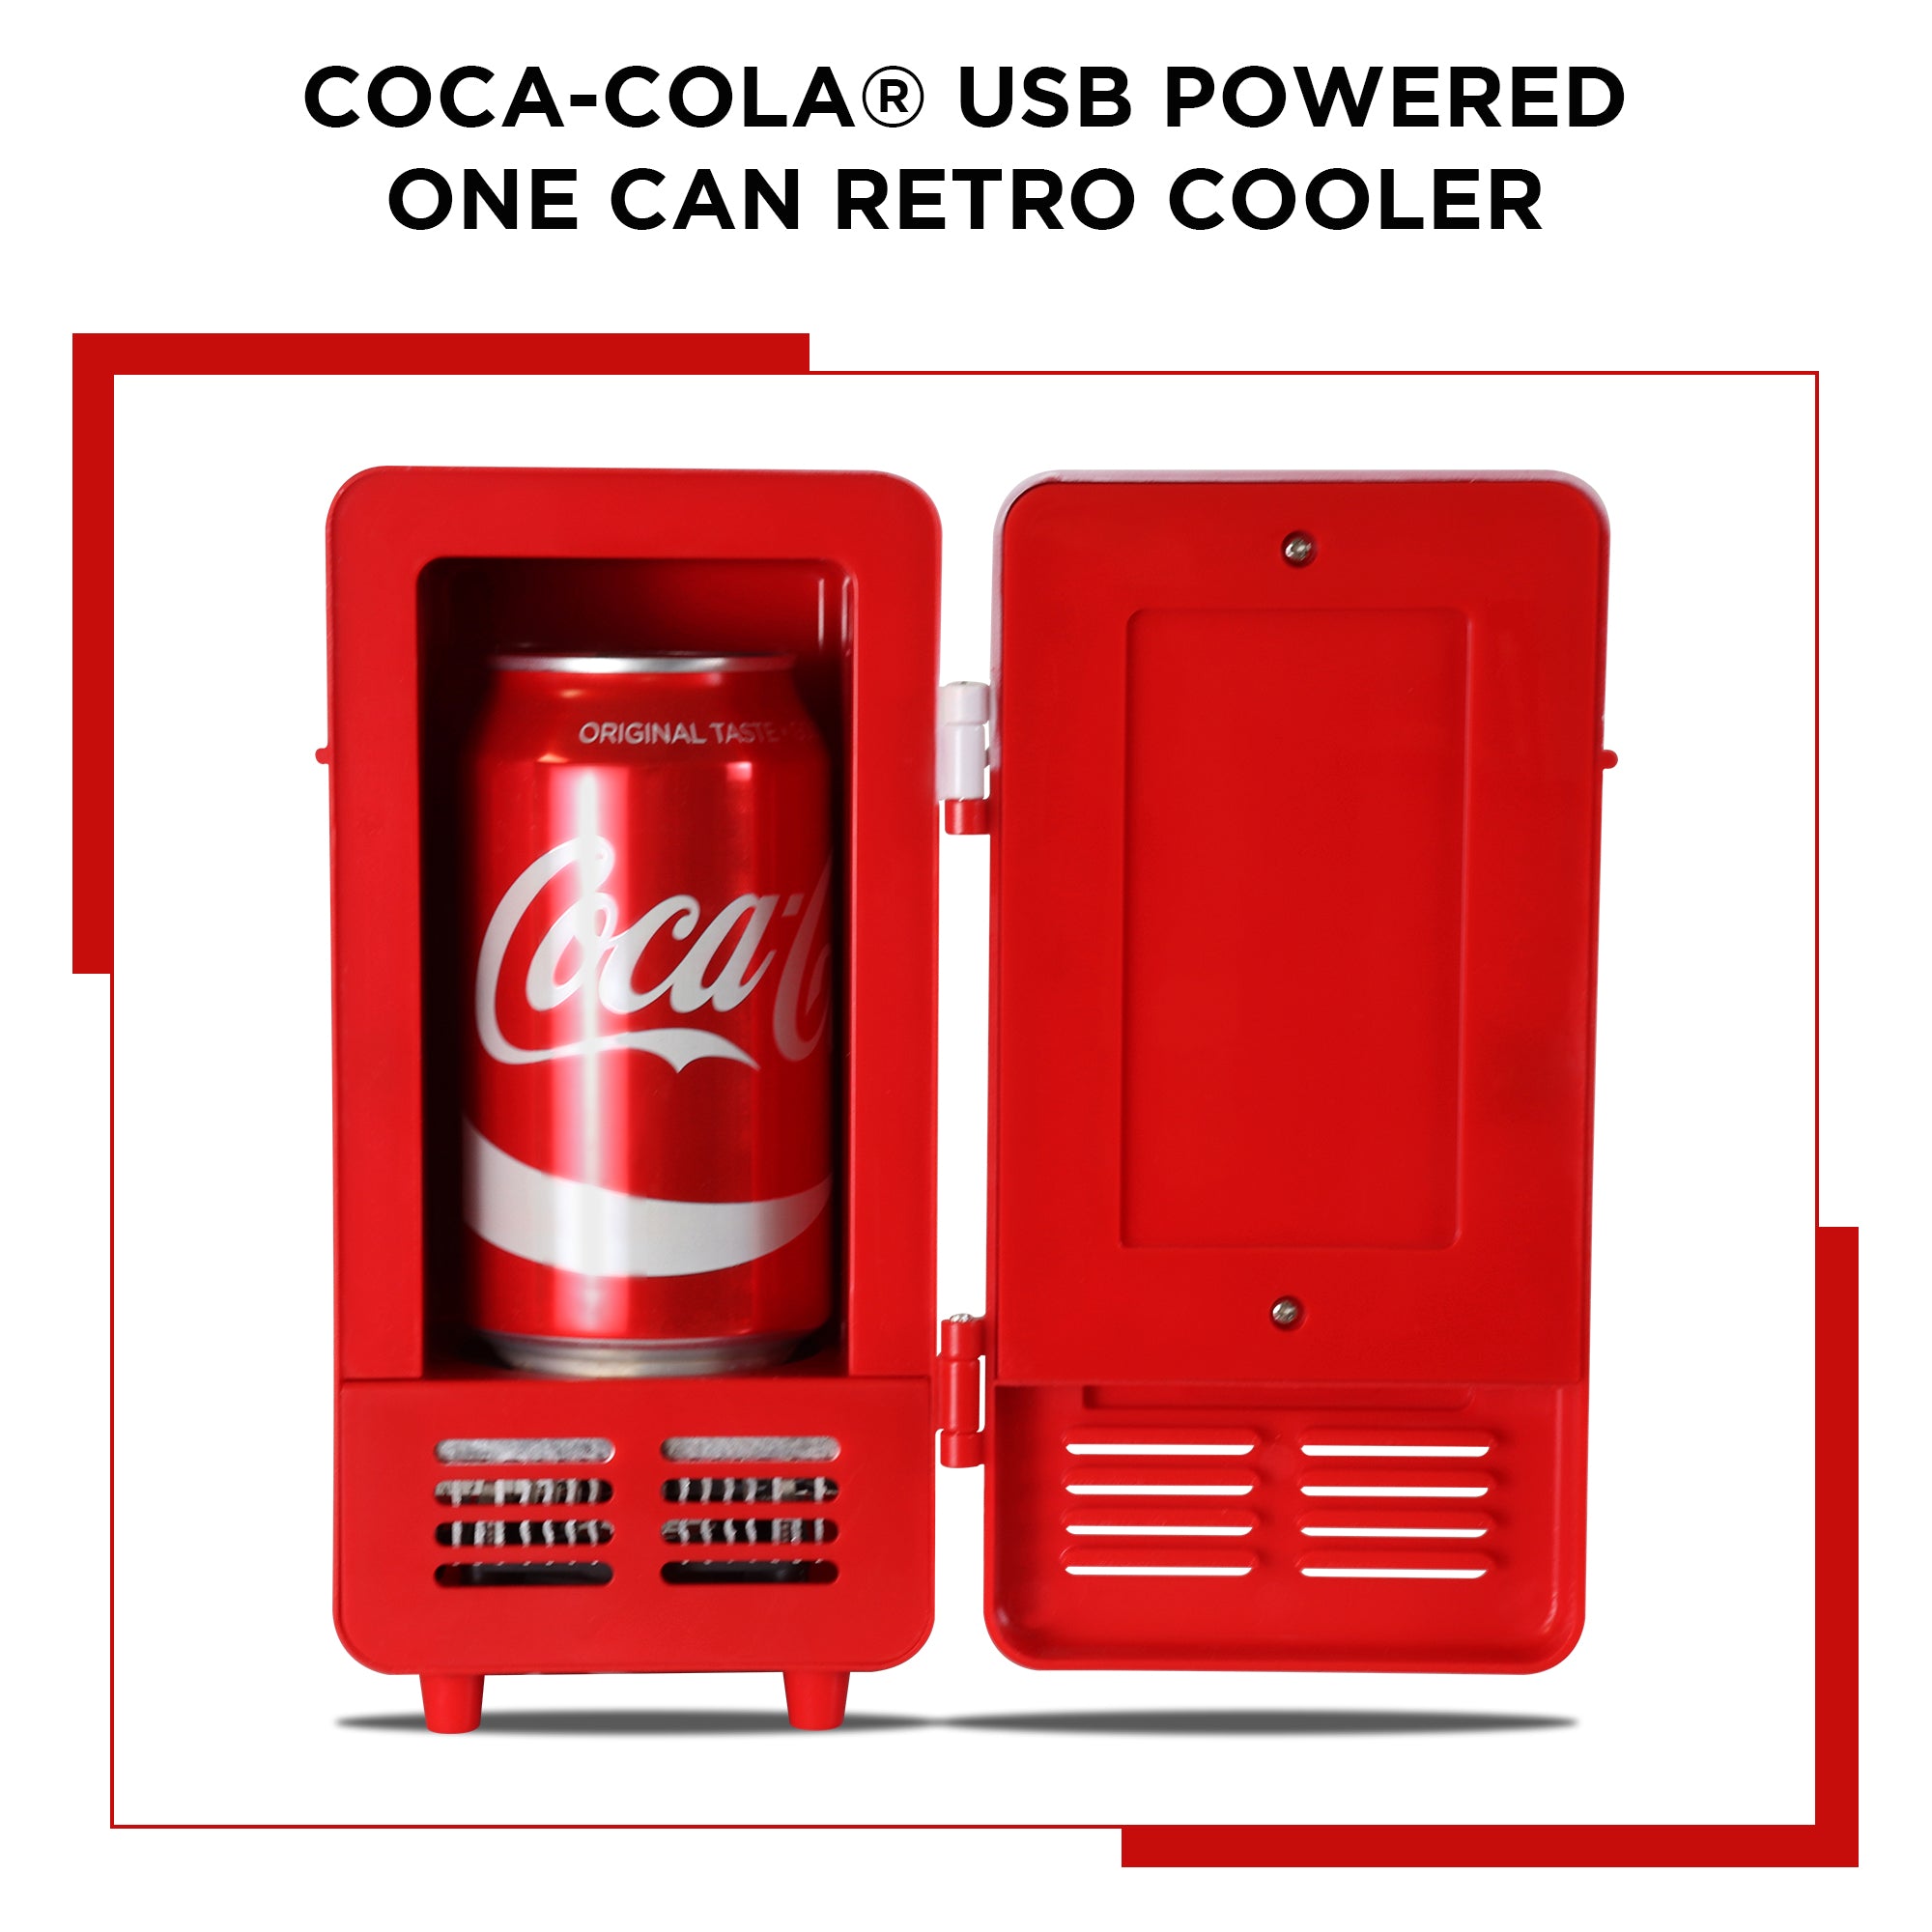 Product shot of Coca-Cola single can USB cooler, open with a can of Coke inside, on a white background with a red border. Text above reads, "Coca-Cola USB powered one can retro cooler"